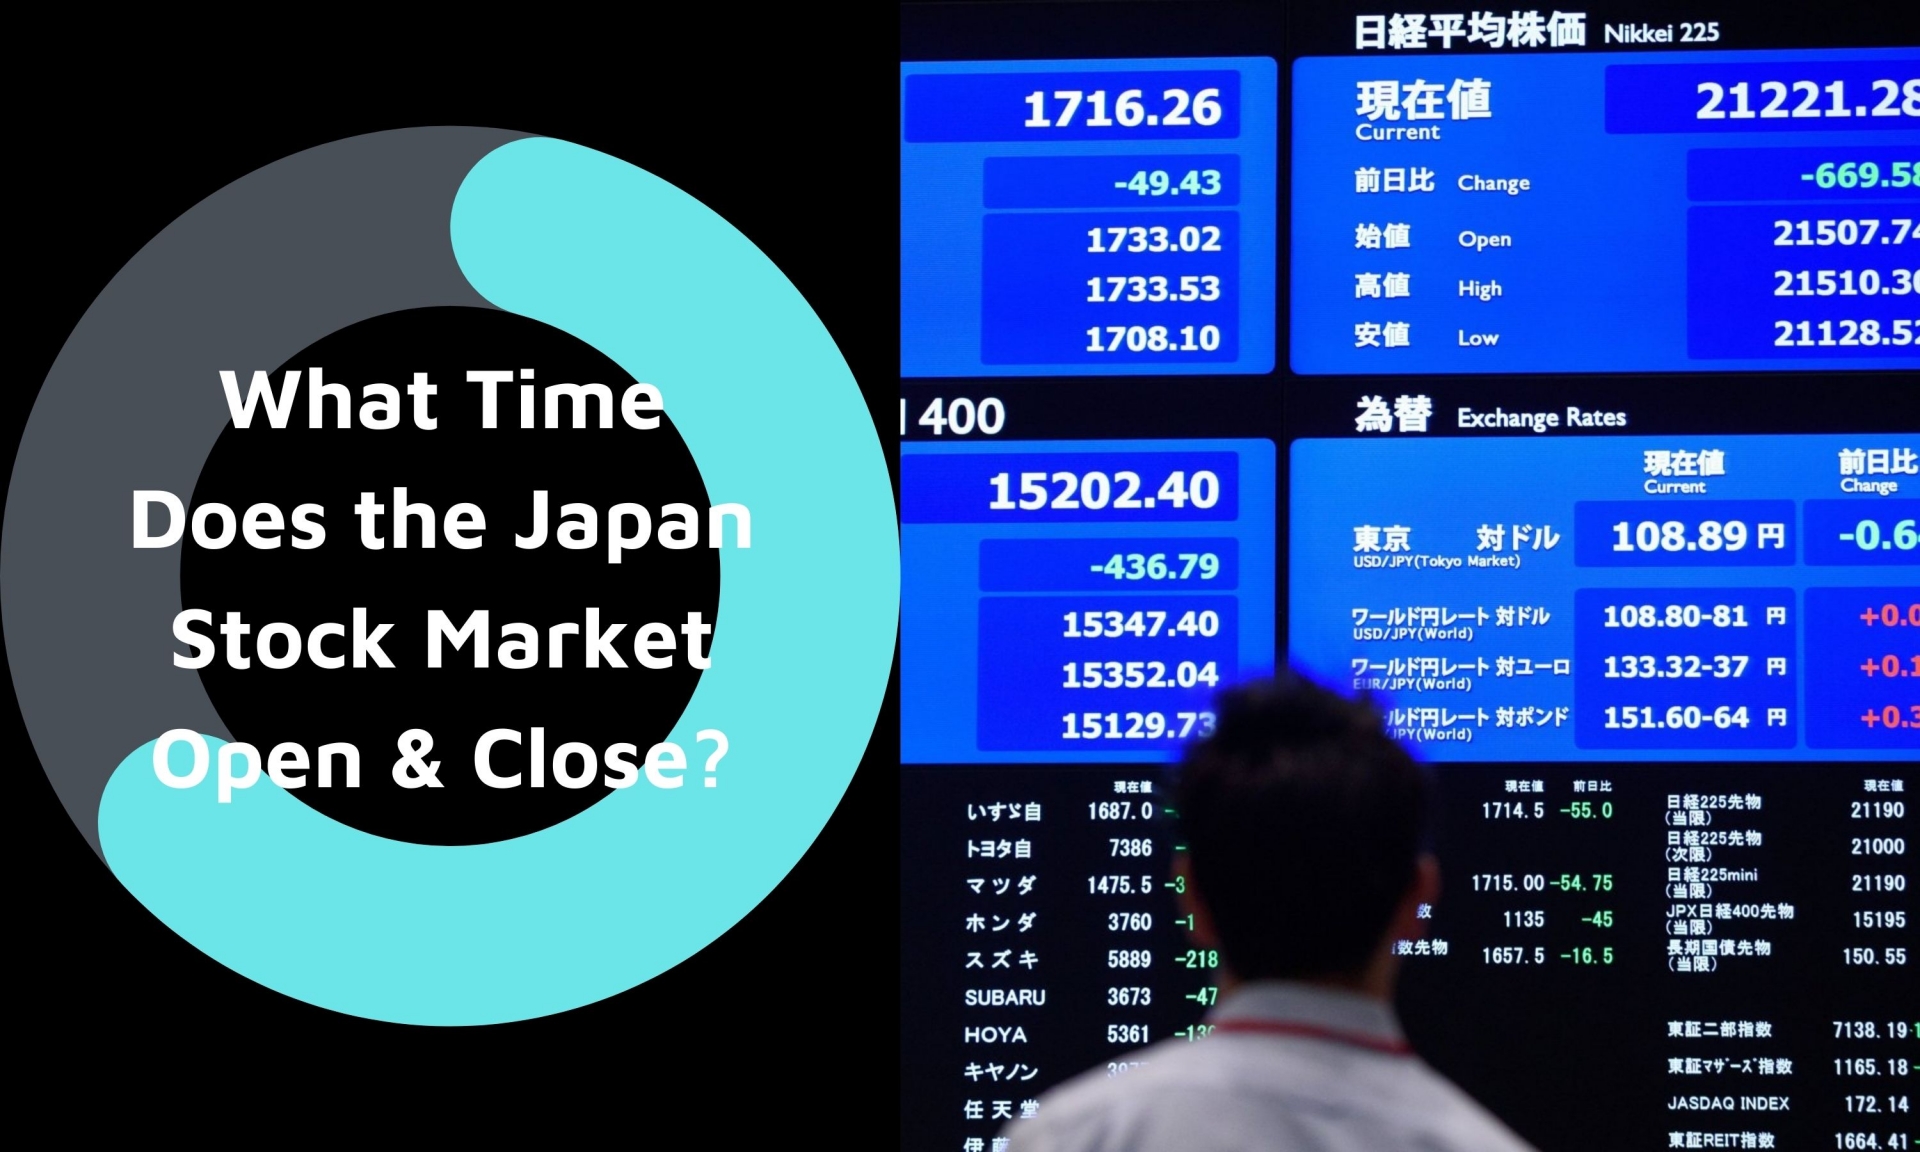 What Time Does the Japan Stock Market Open & Close?